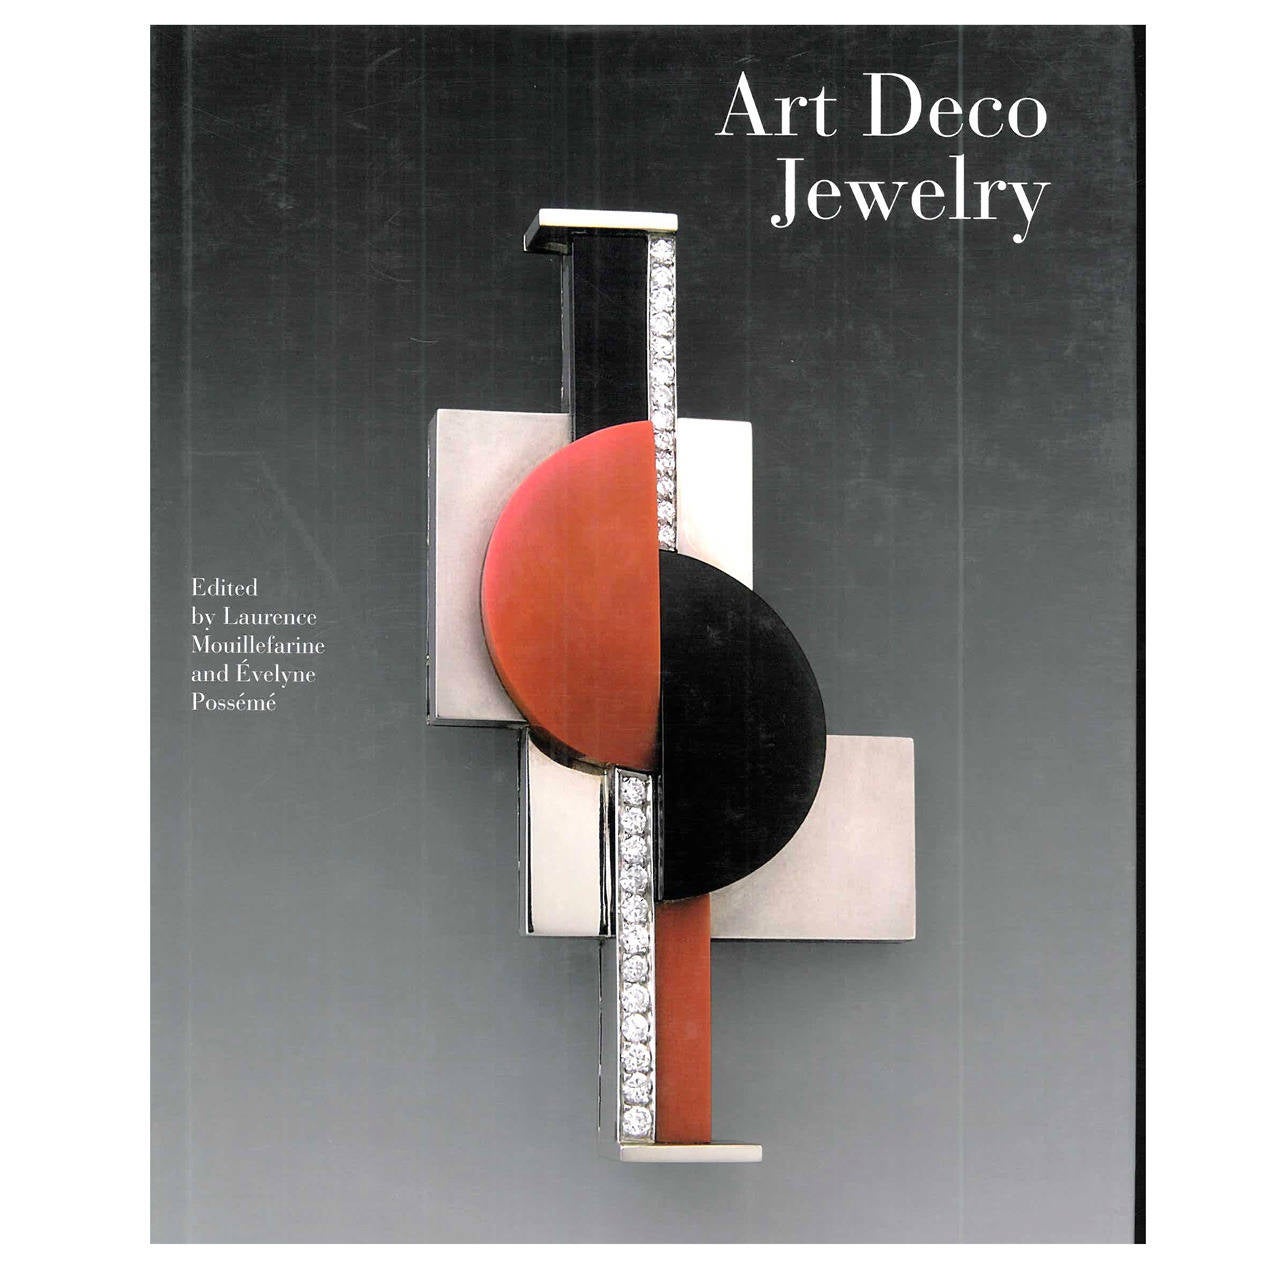 Book Of Art Deco Jewelry For Sale At 1stdibs